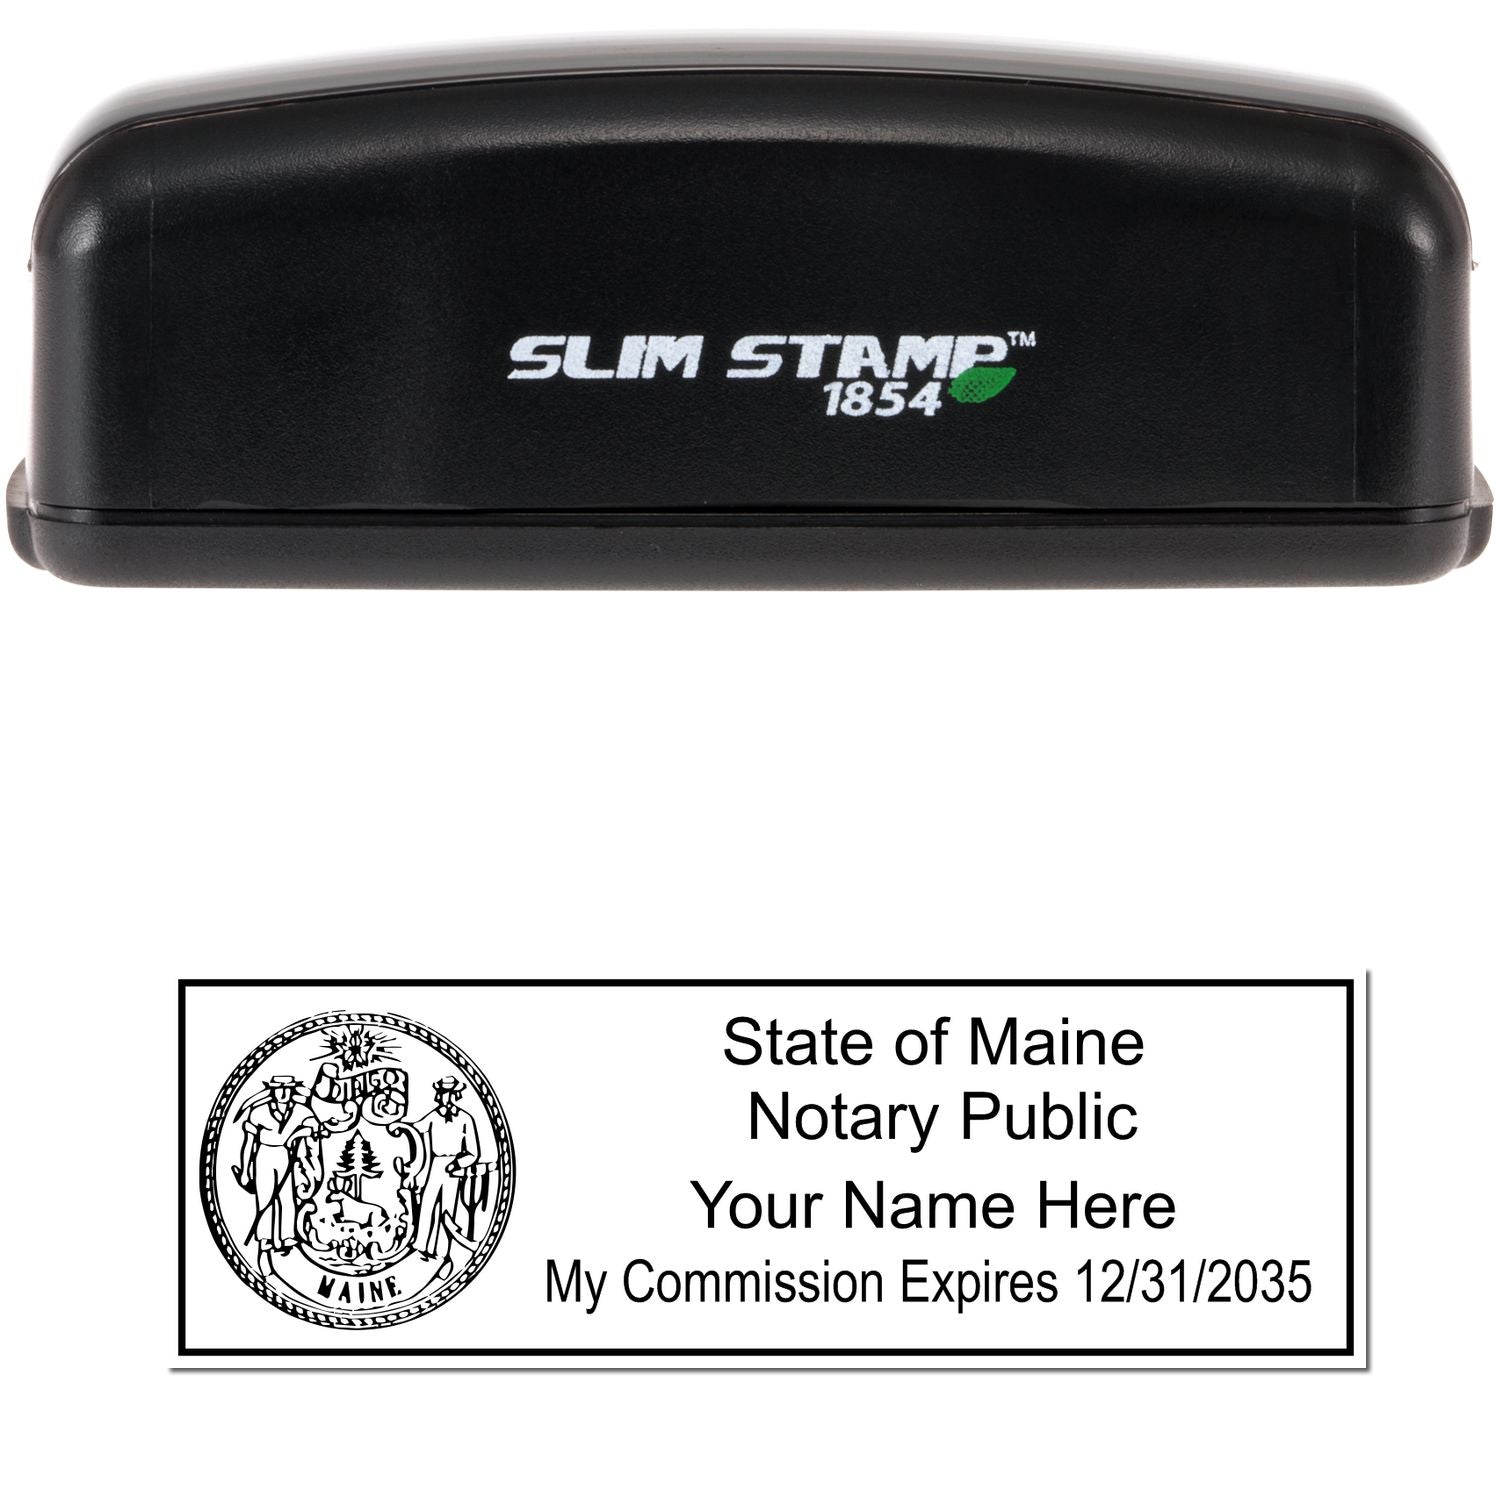 The main image for the Slim Pre-Inked State Seal Notary Stamp for Maine depicting a sample of the imprint and electronic files